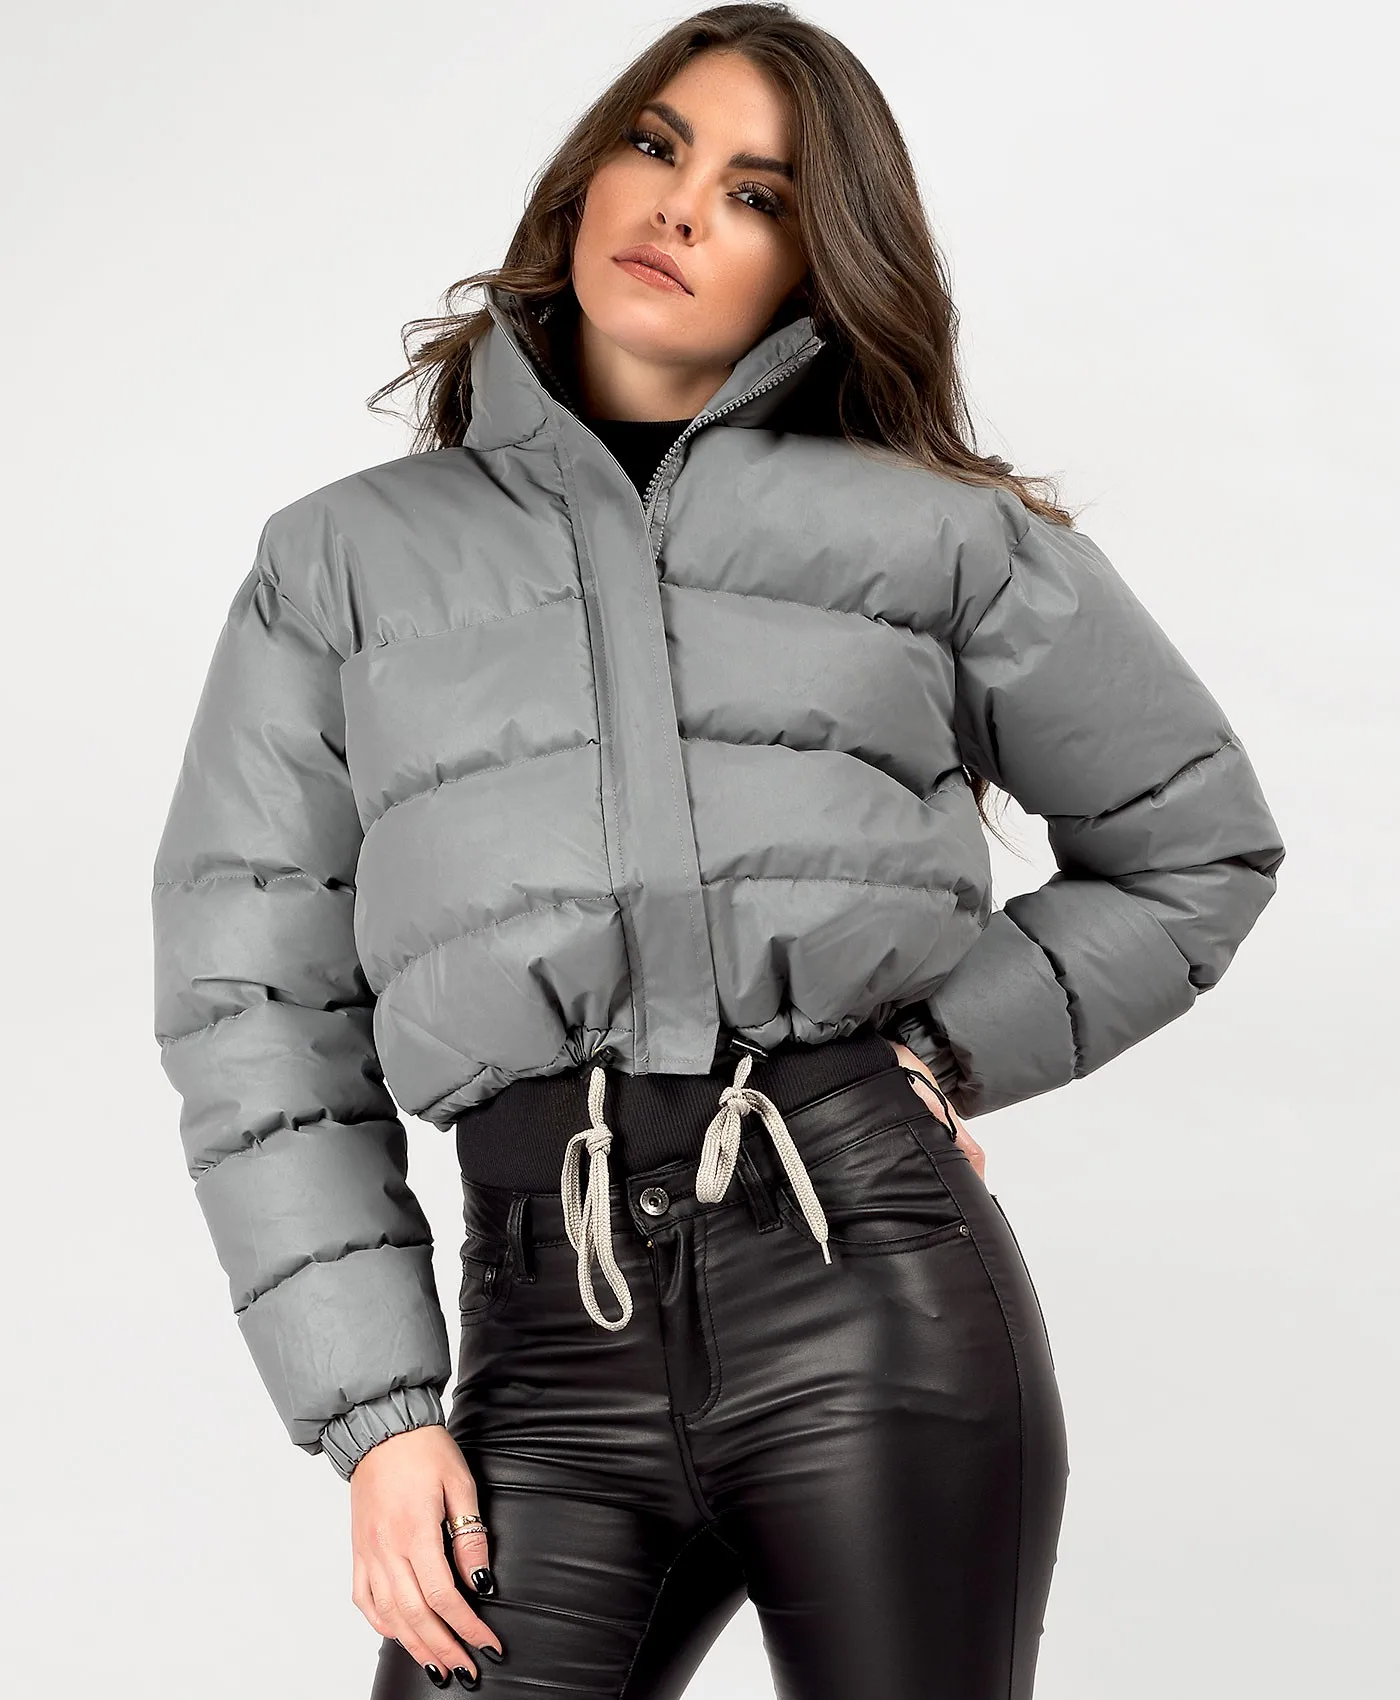 Source Women light Weight Puffer Jacket OEM Style New Puffer Jacket  Polyester Wadding Jacket For Women on m.